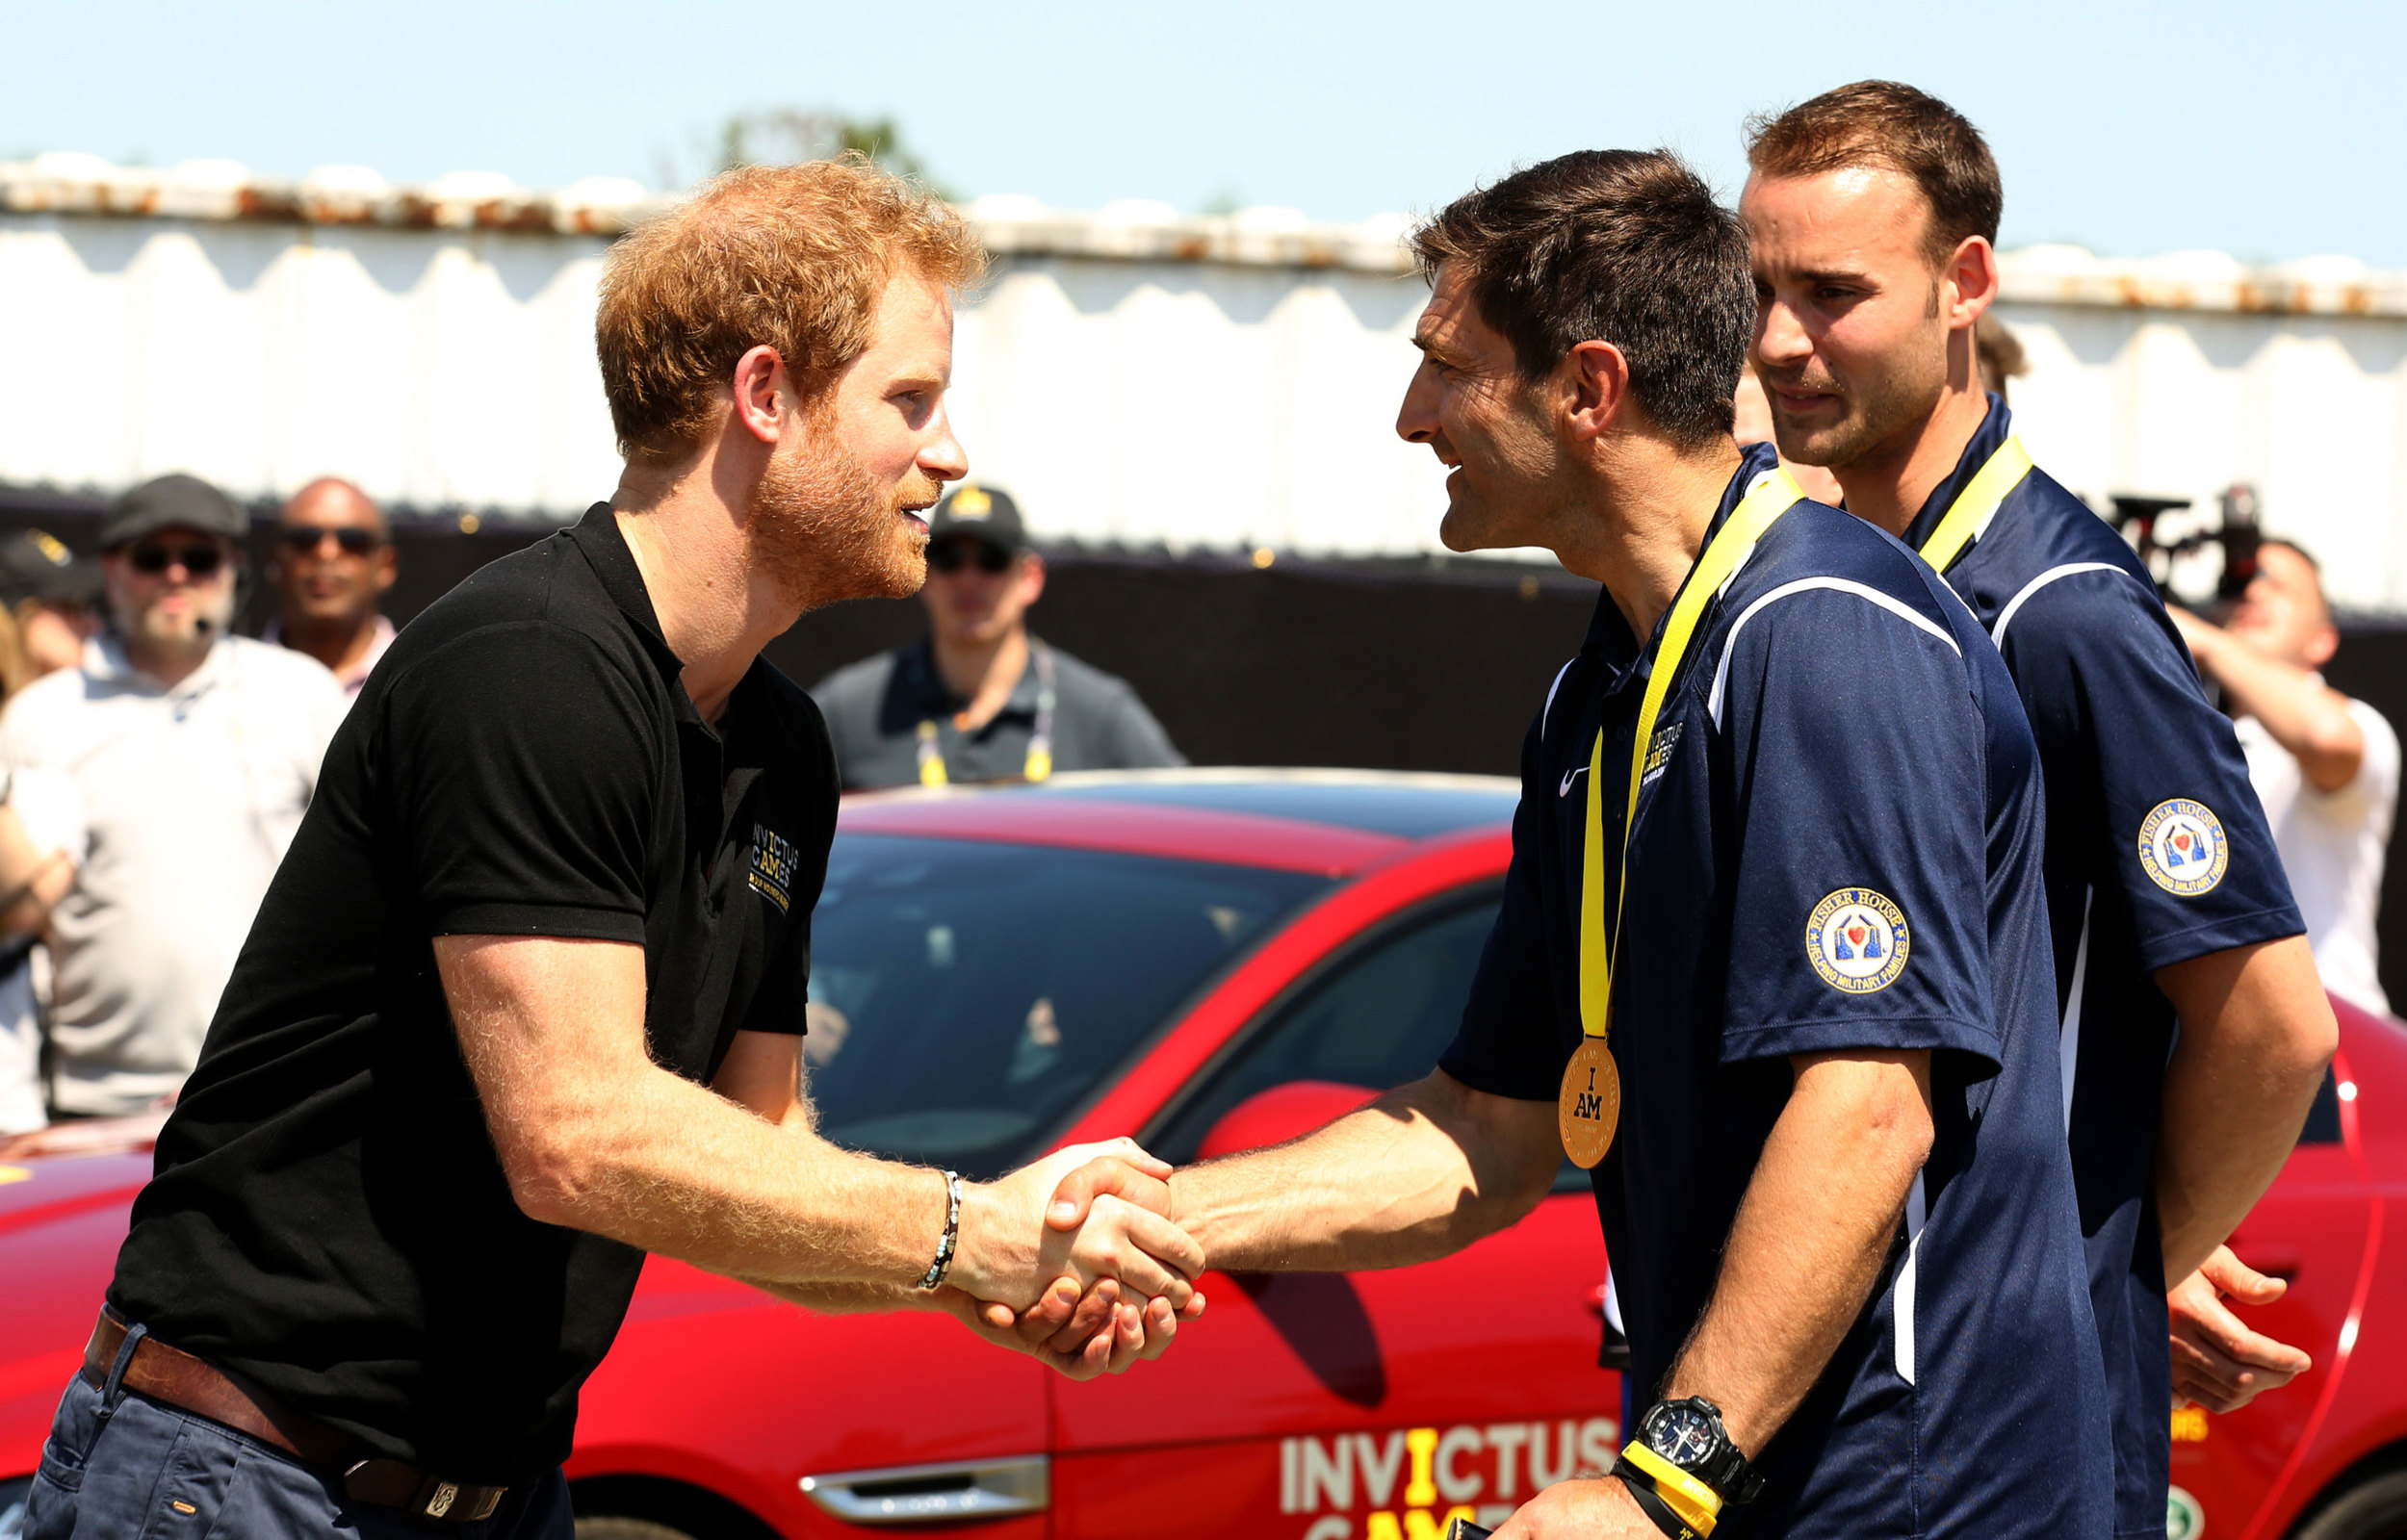 Prince_Harry_takes_part_in_the_Jaguar_Land_Rover_Driving_Challenge_and_awards_France_the_first_gold_medal_at_Invictus_Games_Orlando_2016-France_(130747).jpg